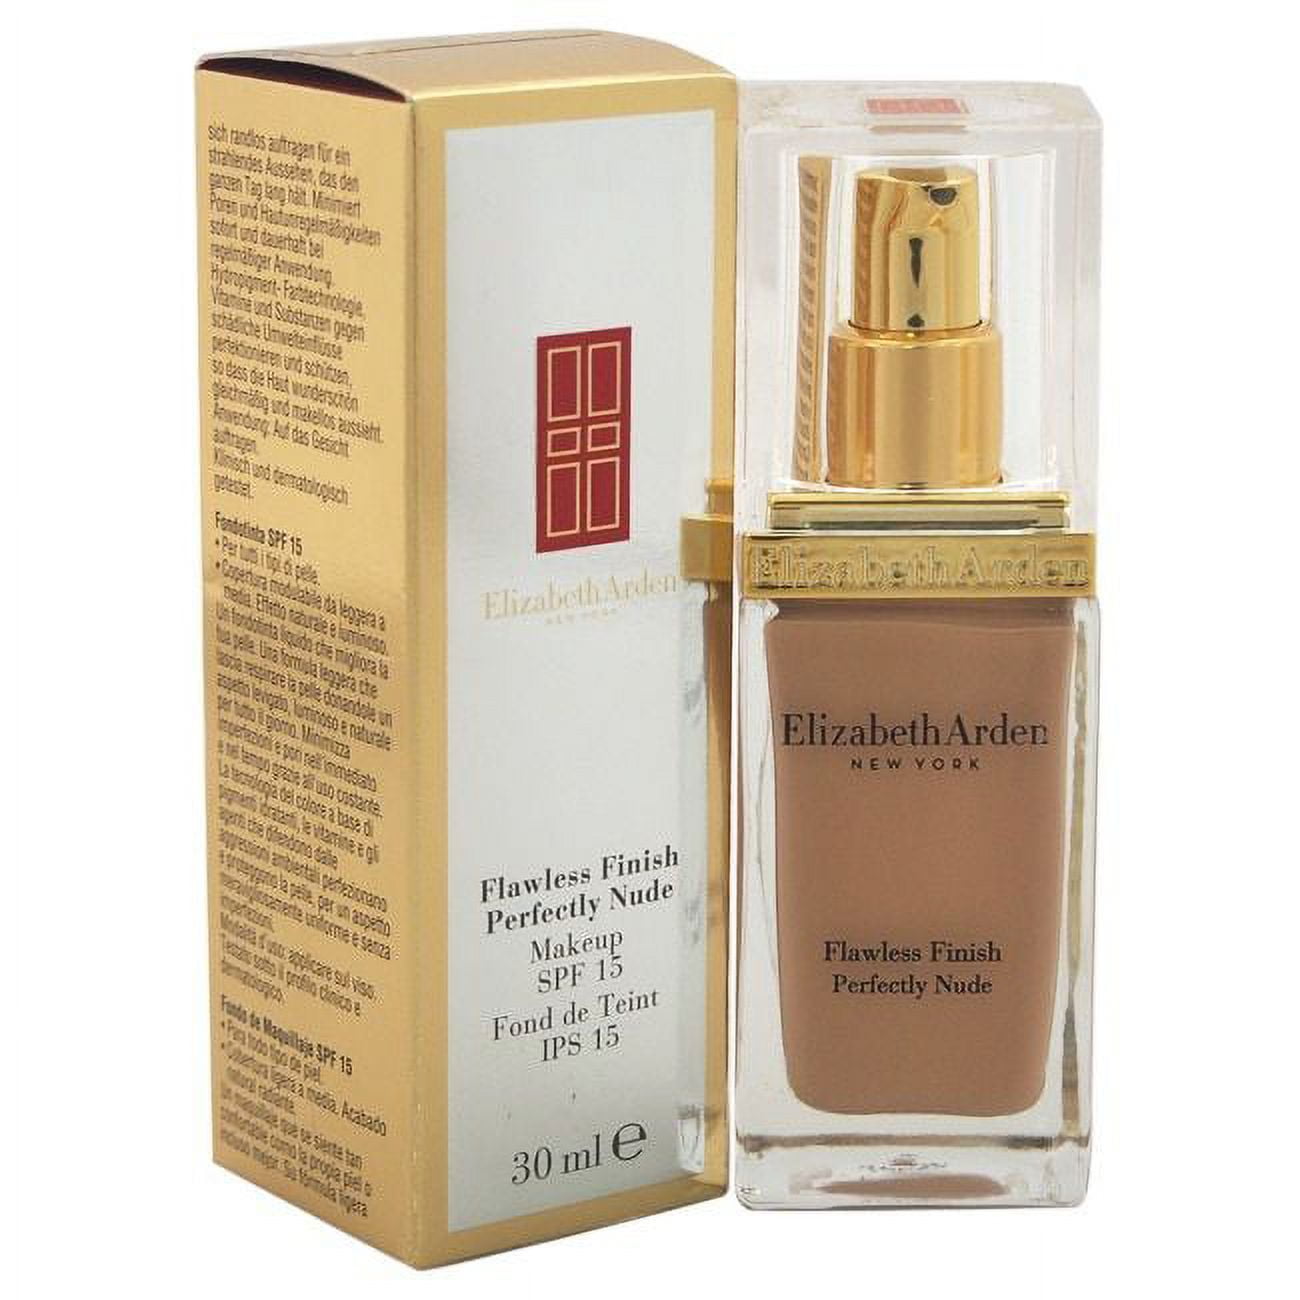 Elizabeth Arden Flawless Finish Perfectly Nude Makeup Spf 15 03